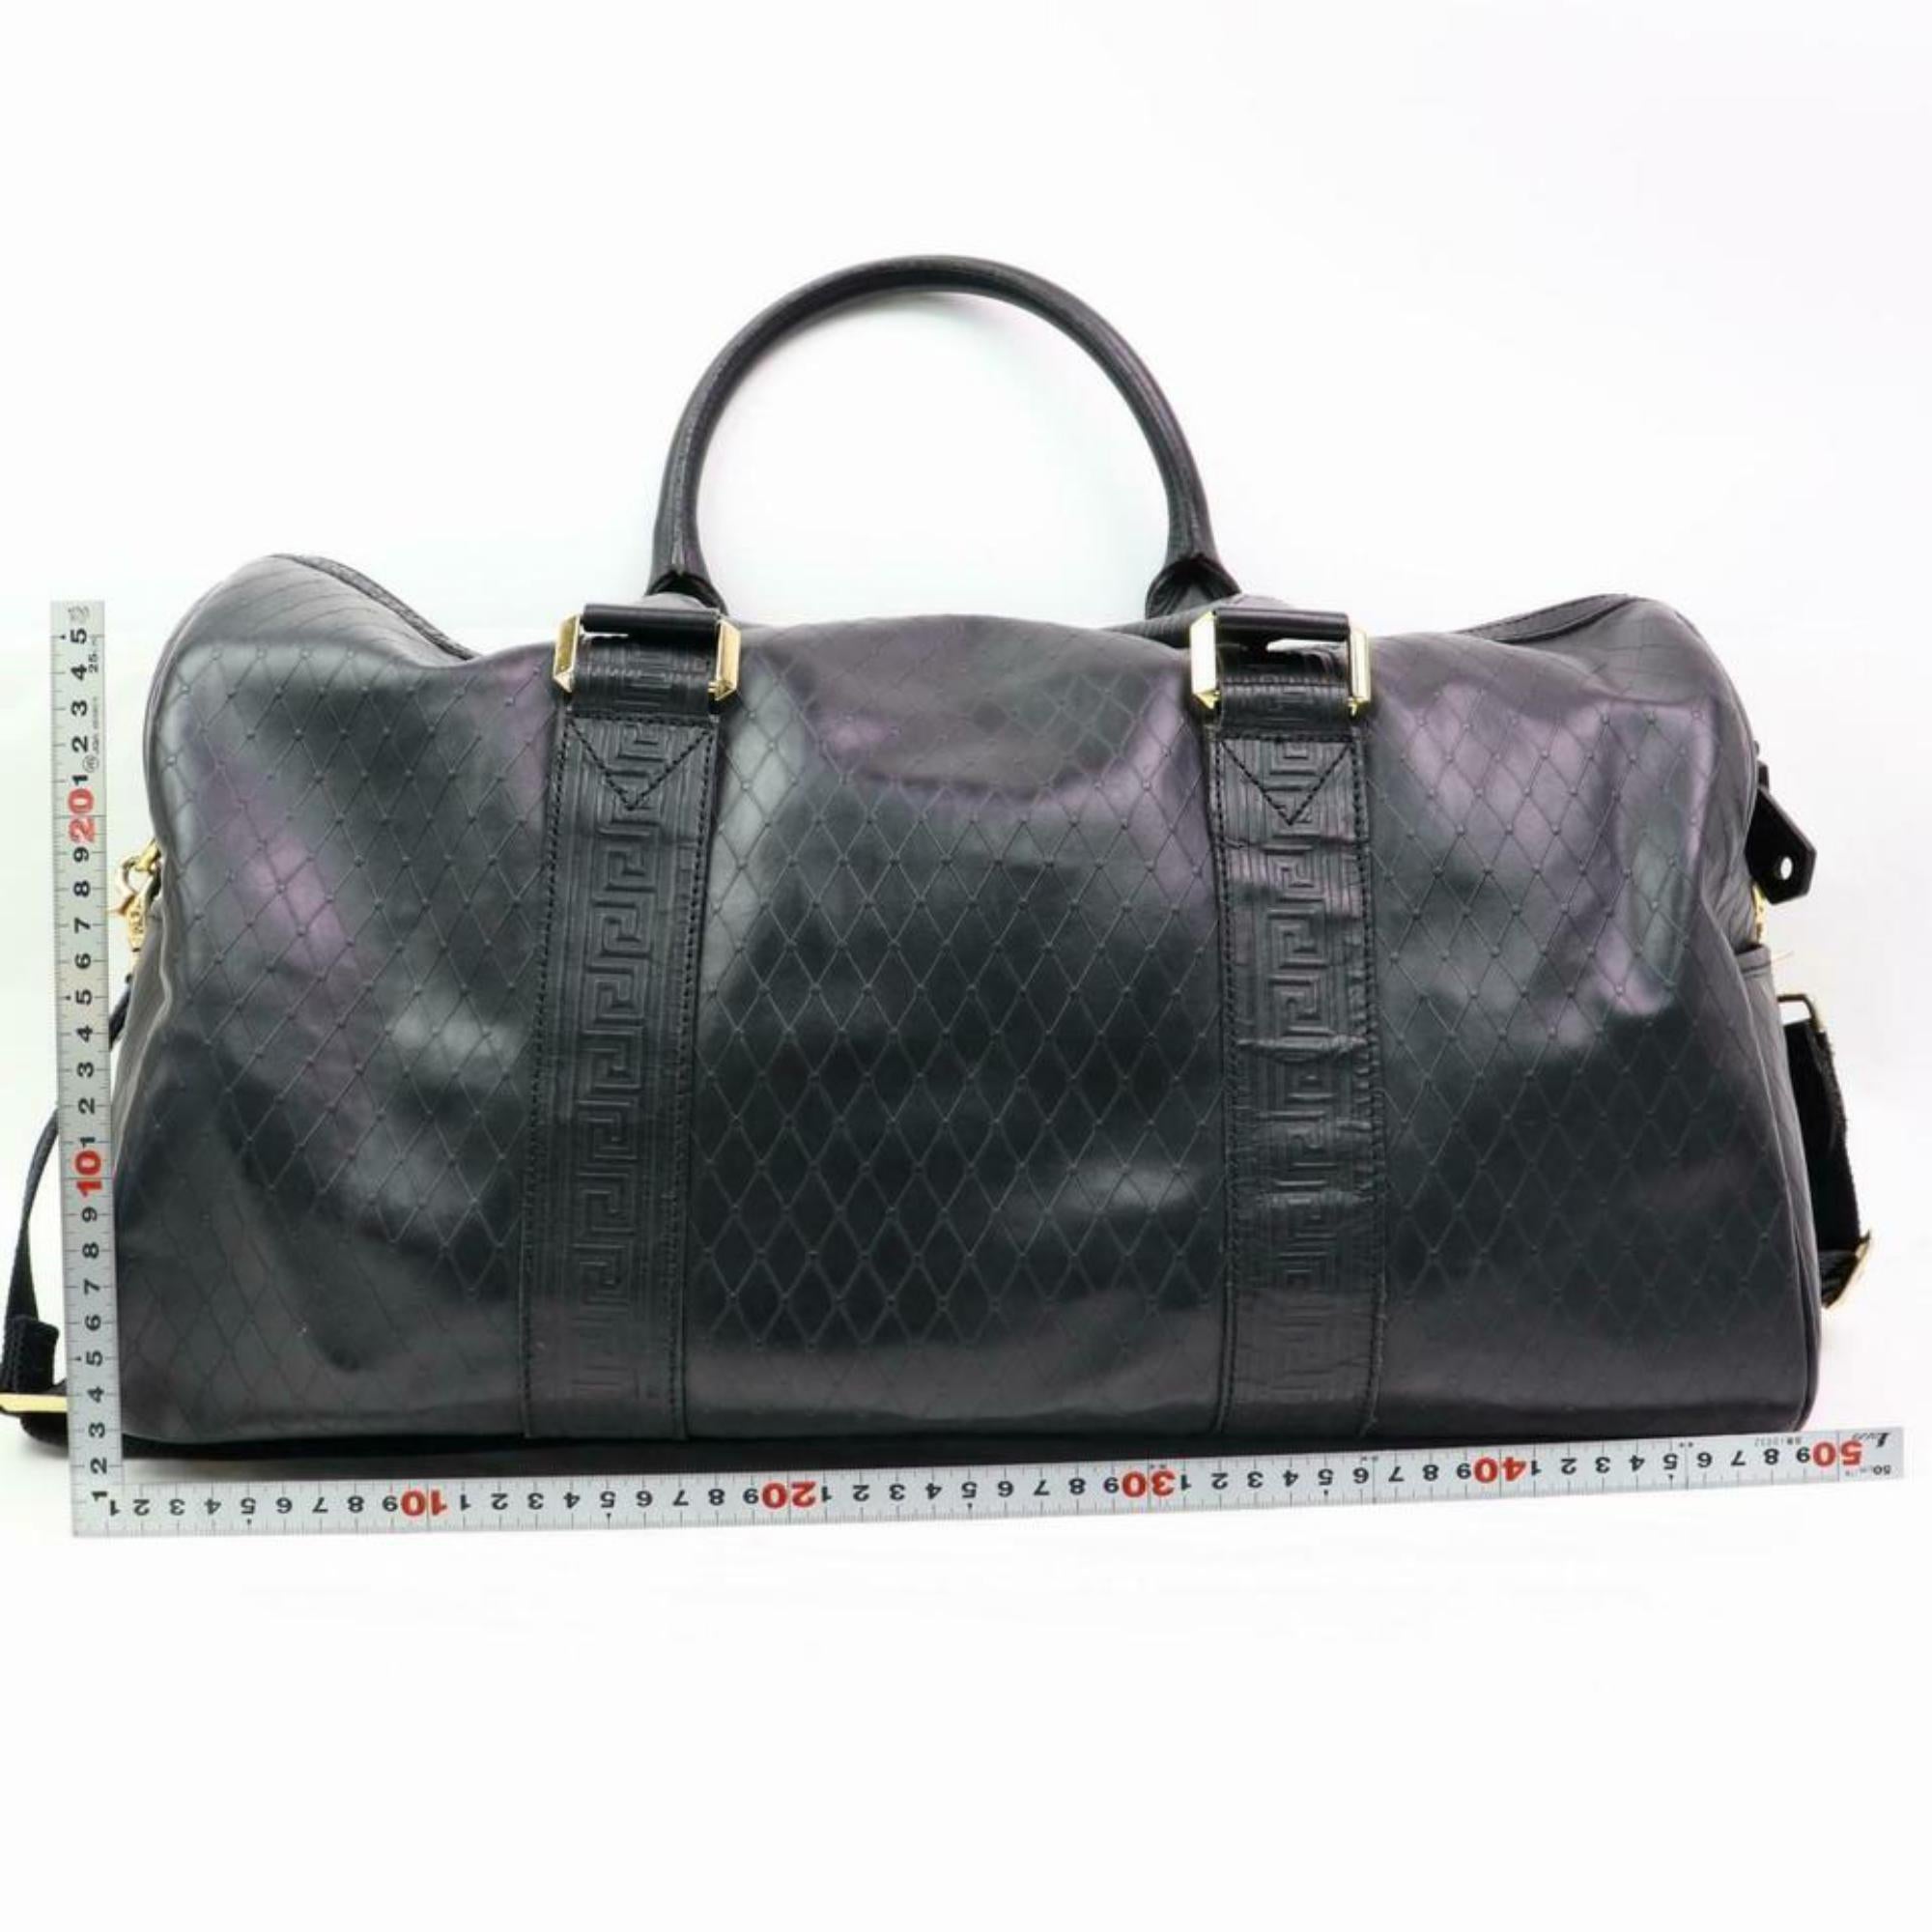 Versace Medusa Sun Quilted with Strap 870332 Black Patent Leather Travel Bag In Good Condition For Sale In Forest Hills, NY